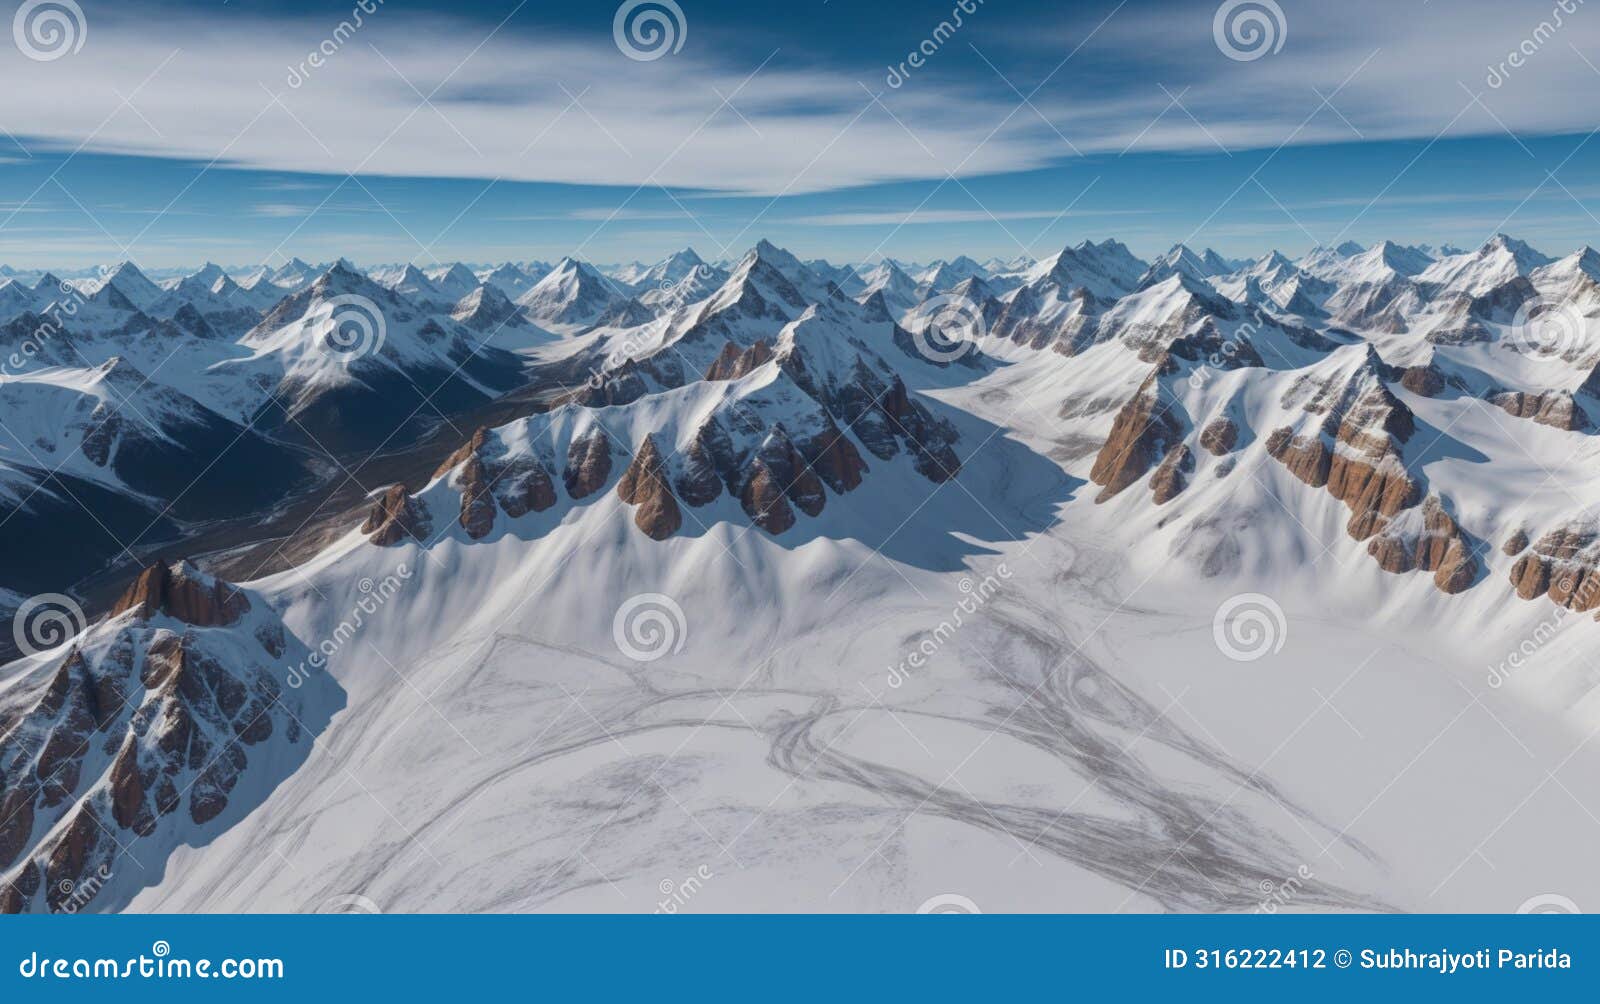 ai generated panoramic image of snow clad mountain range with blue skies at the horizon